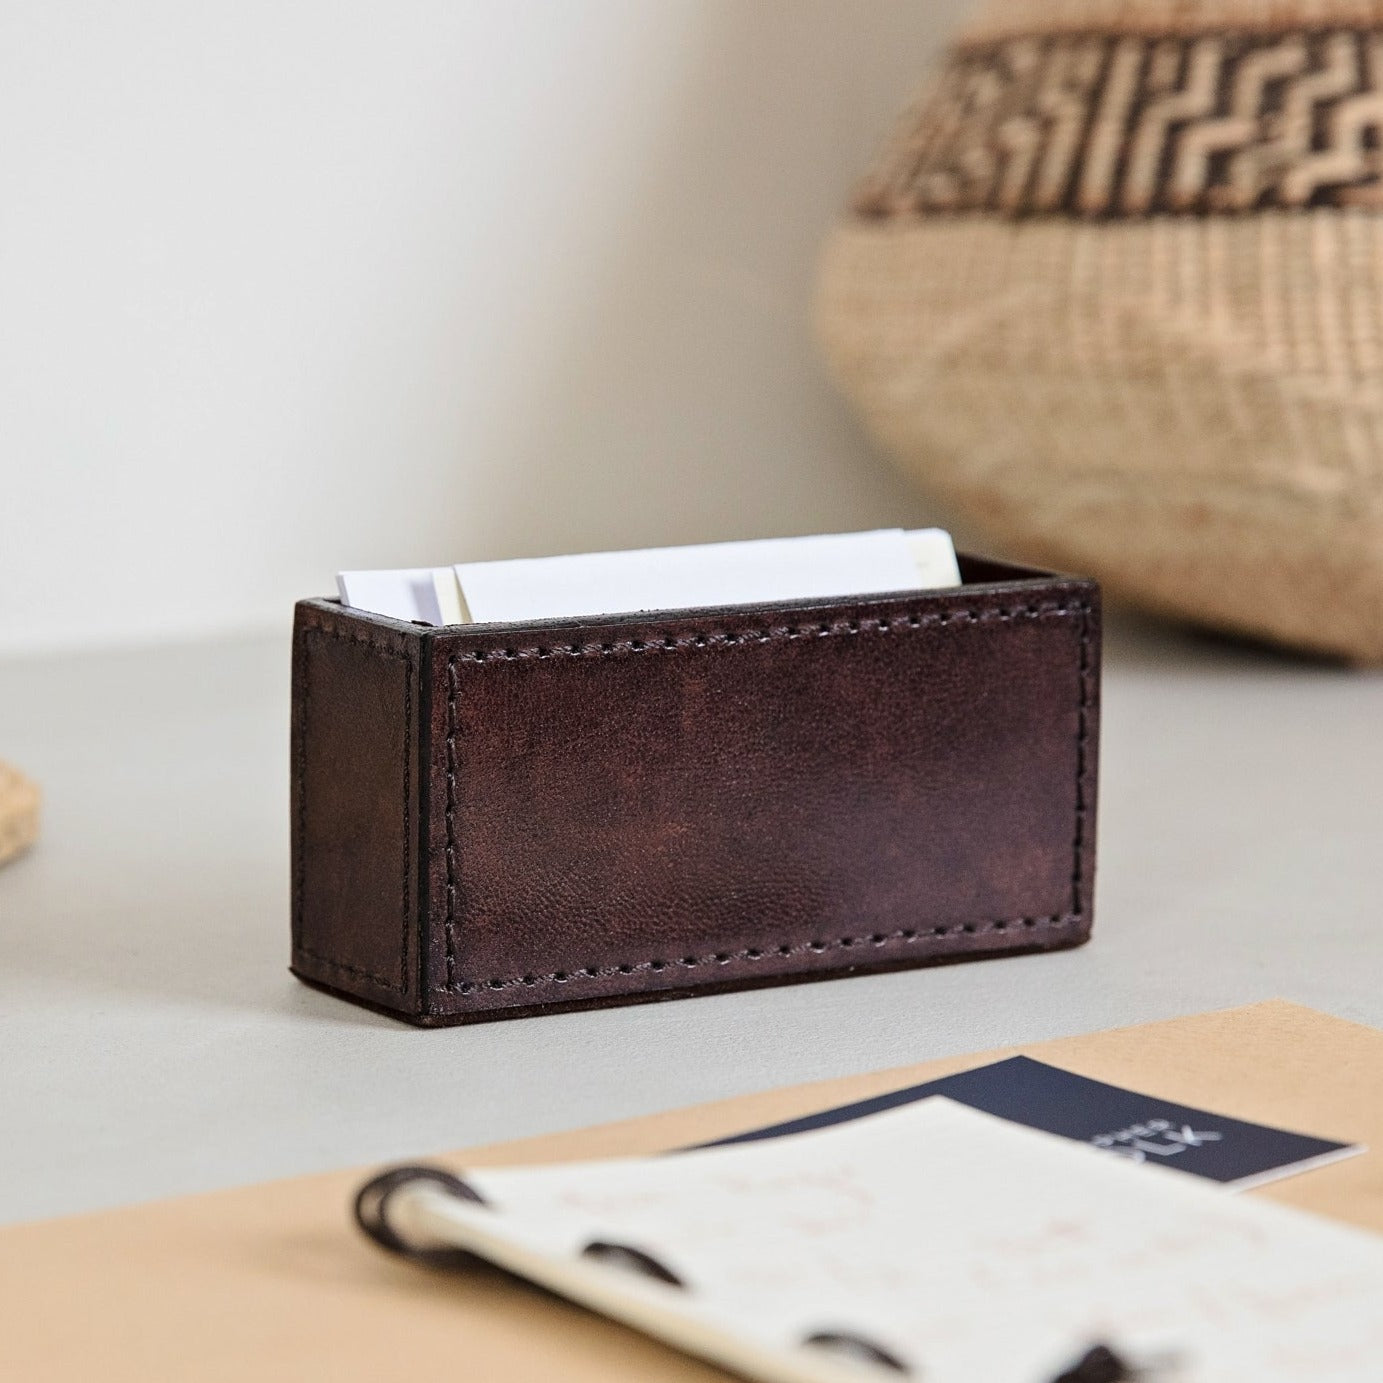 Timeless dark brown leather business card holder for easy desktop storage. Personalise for a thoughtful gift to celebrate a new job.